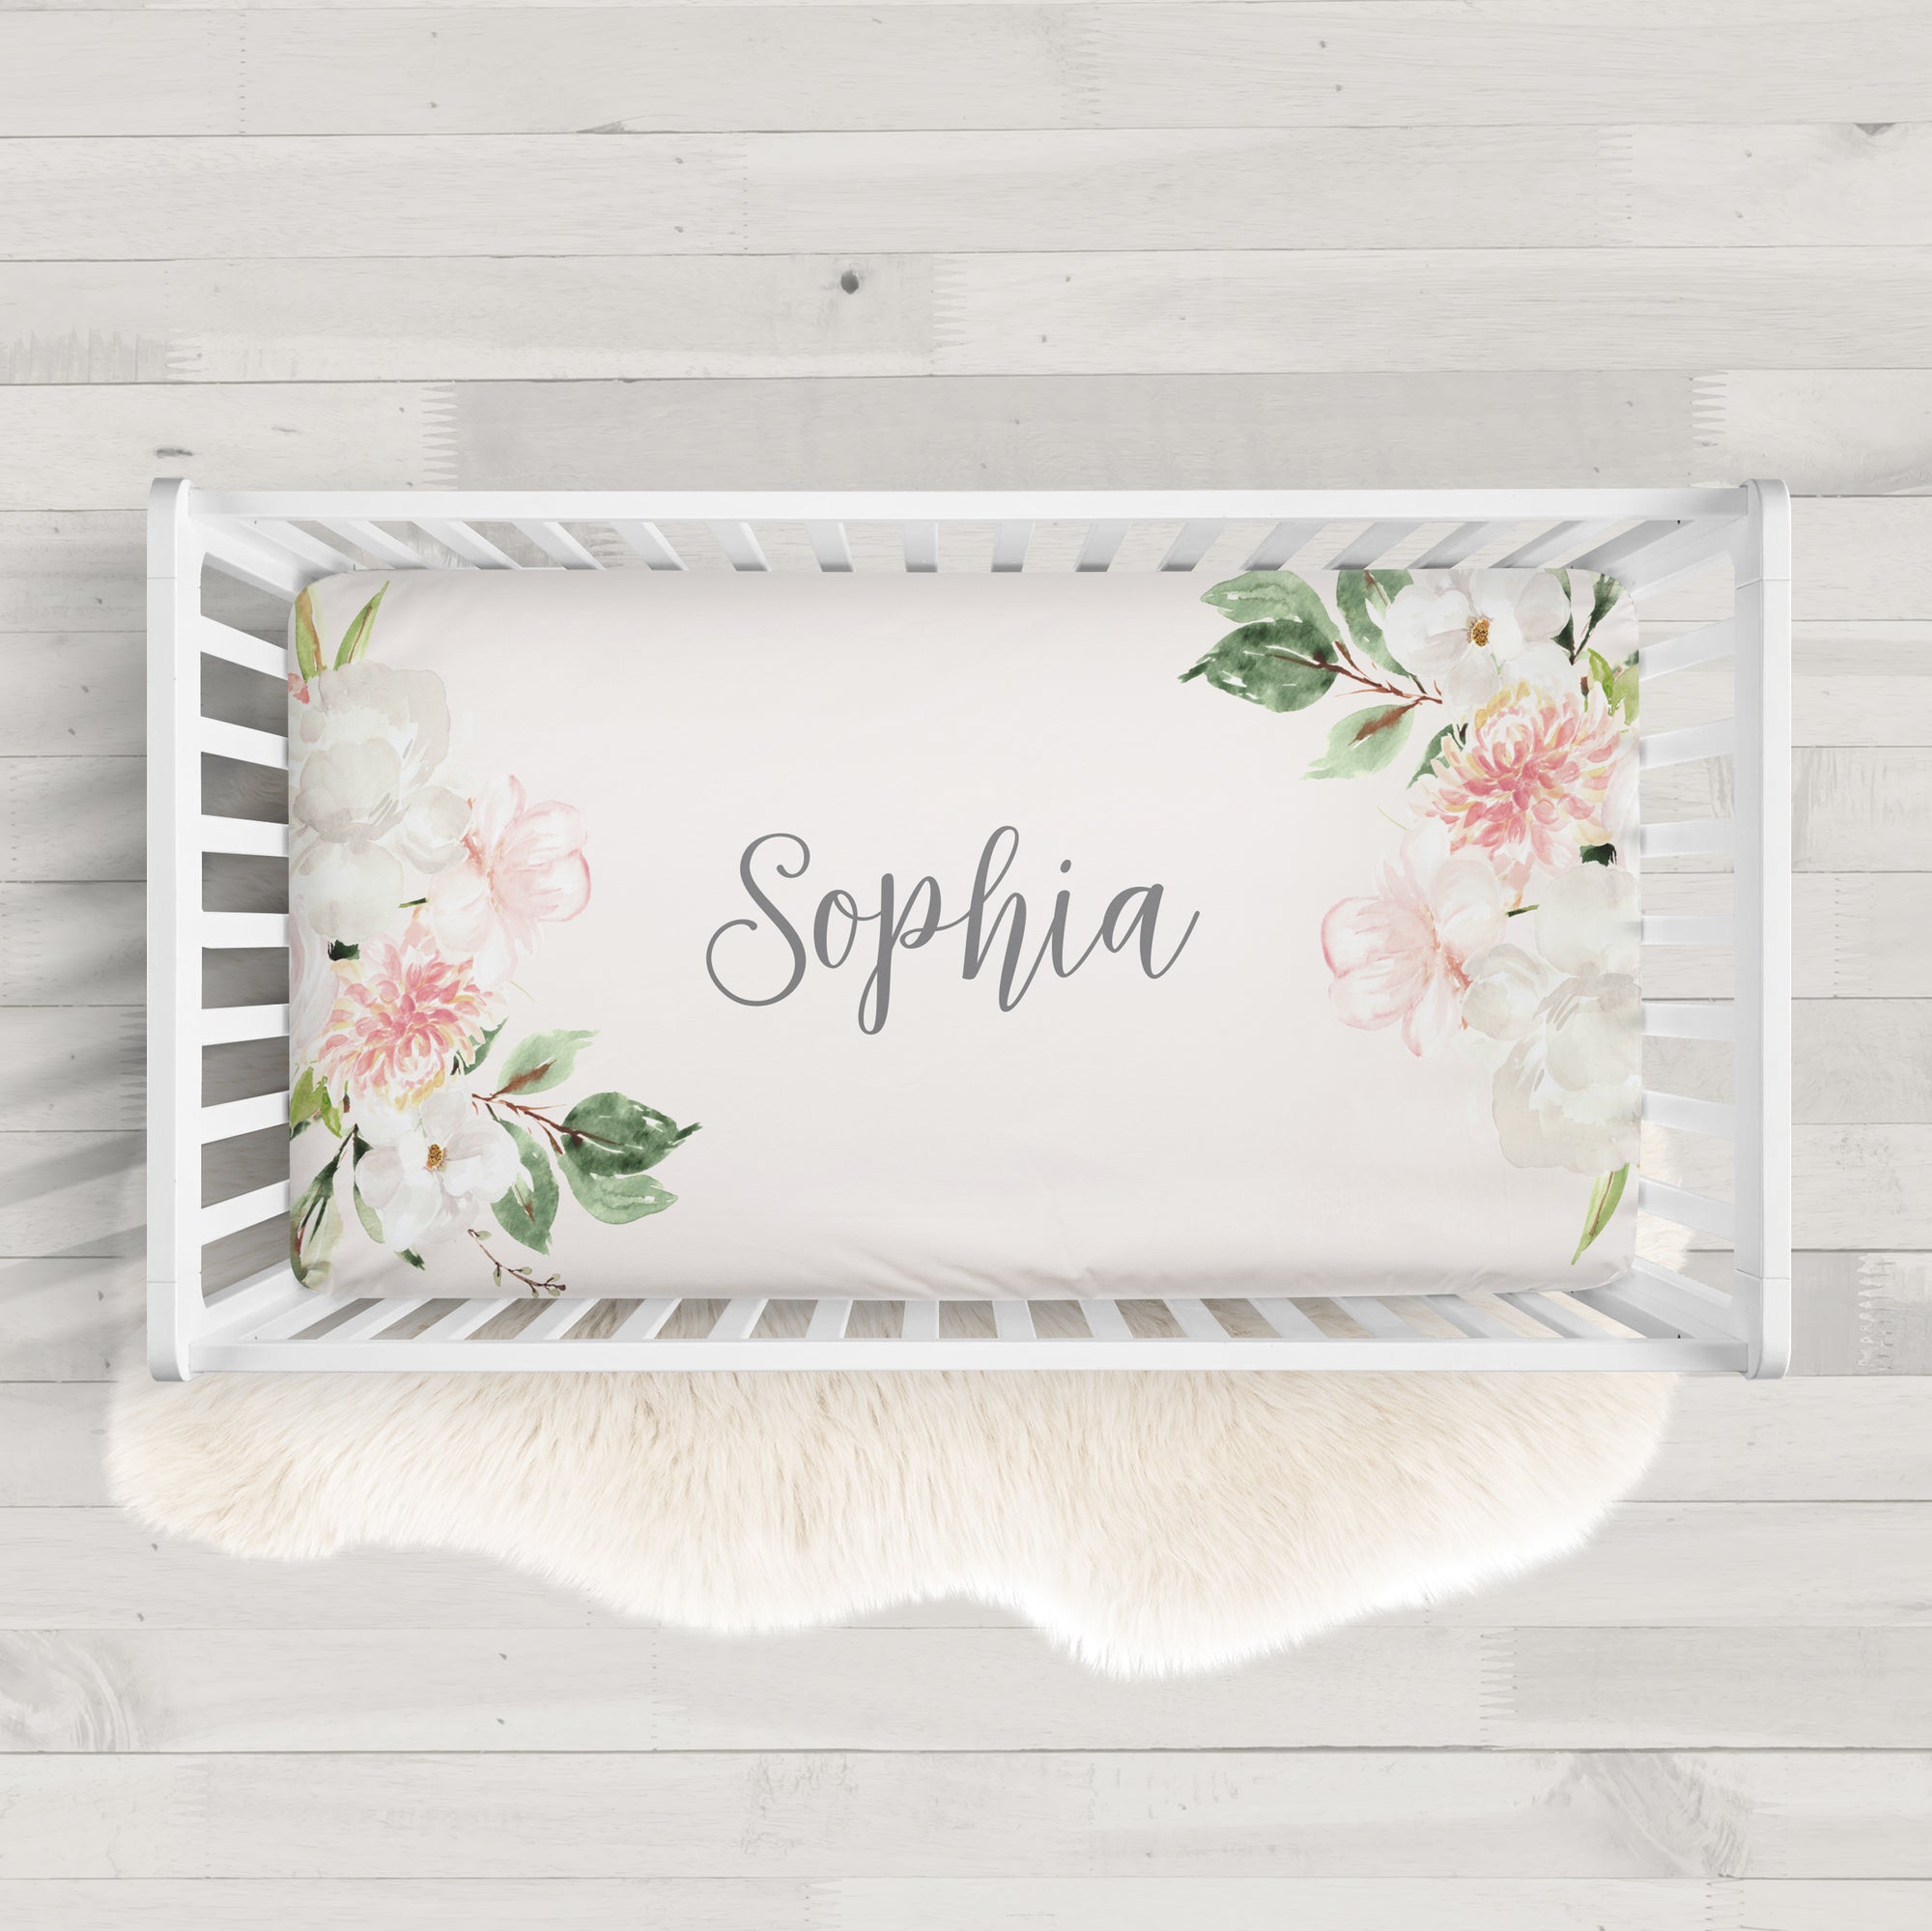 Soft Floral Personalized Crib Sheet